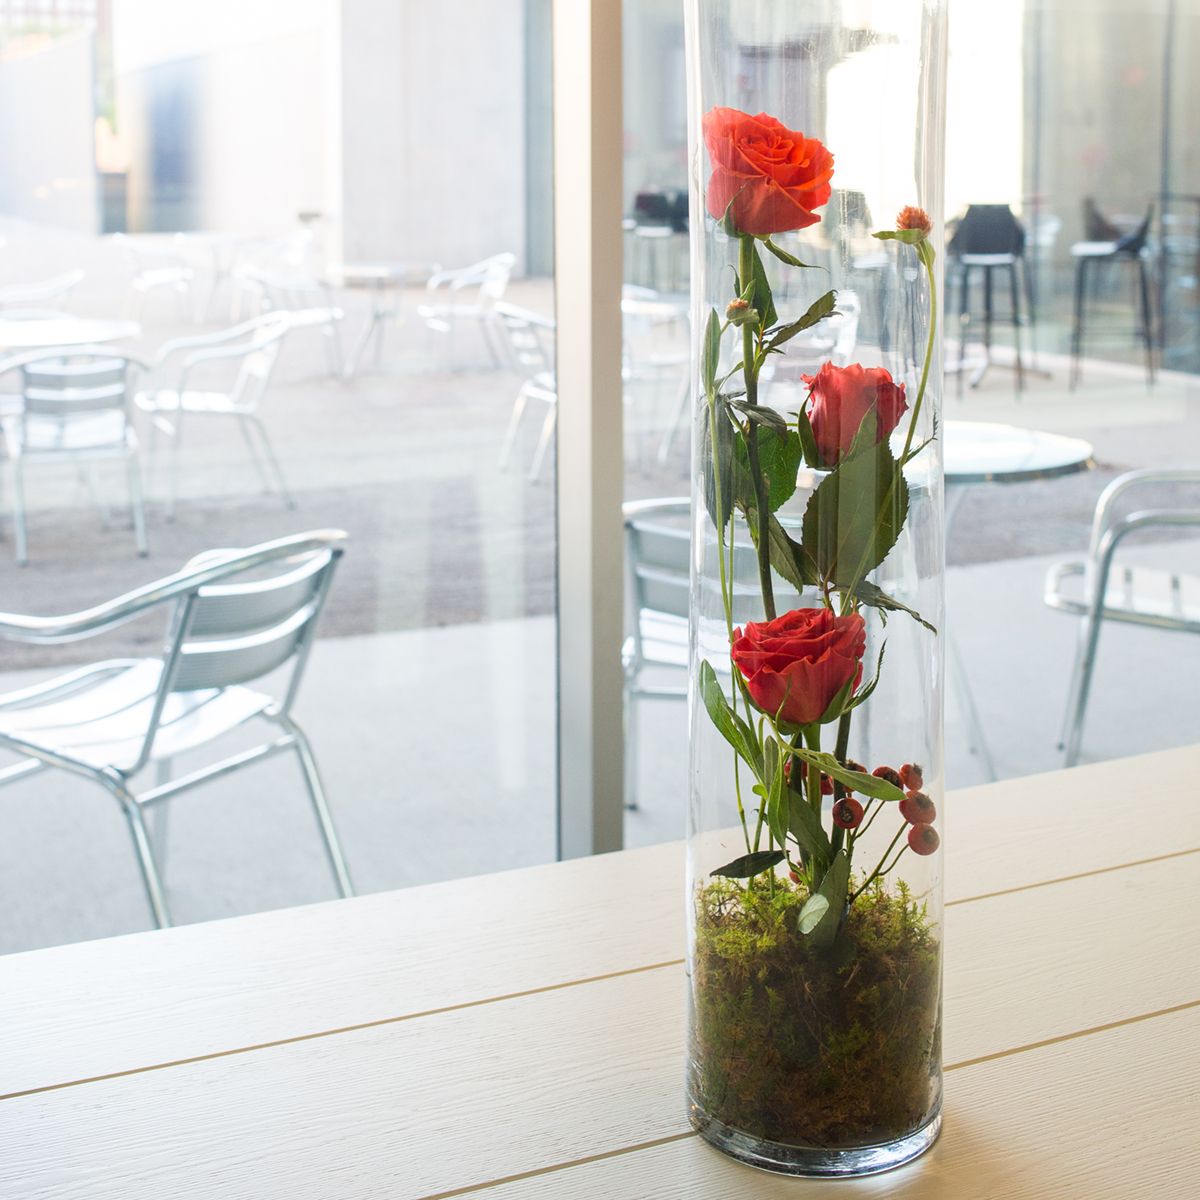 roses in a cylindrical glass vase on a table in a light, airy restaurant